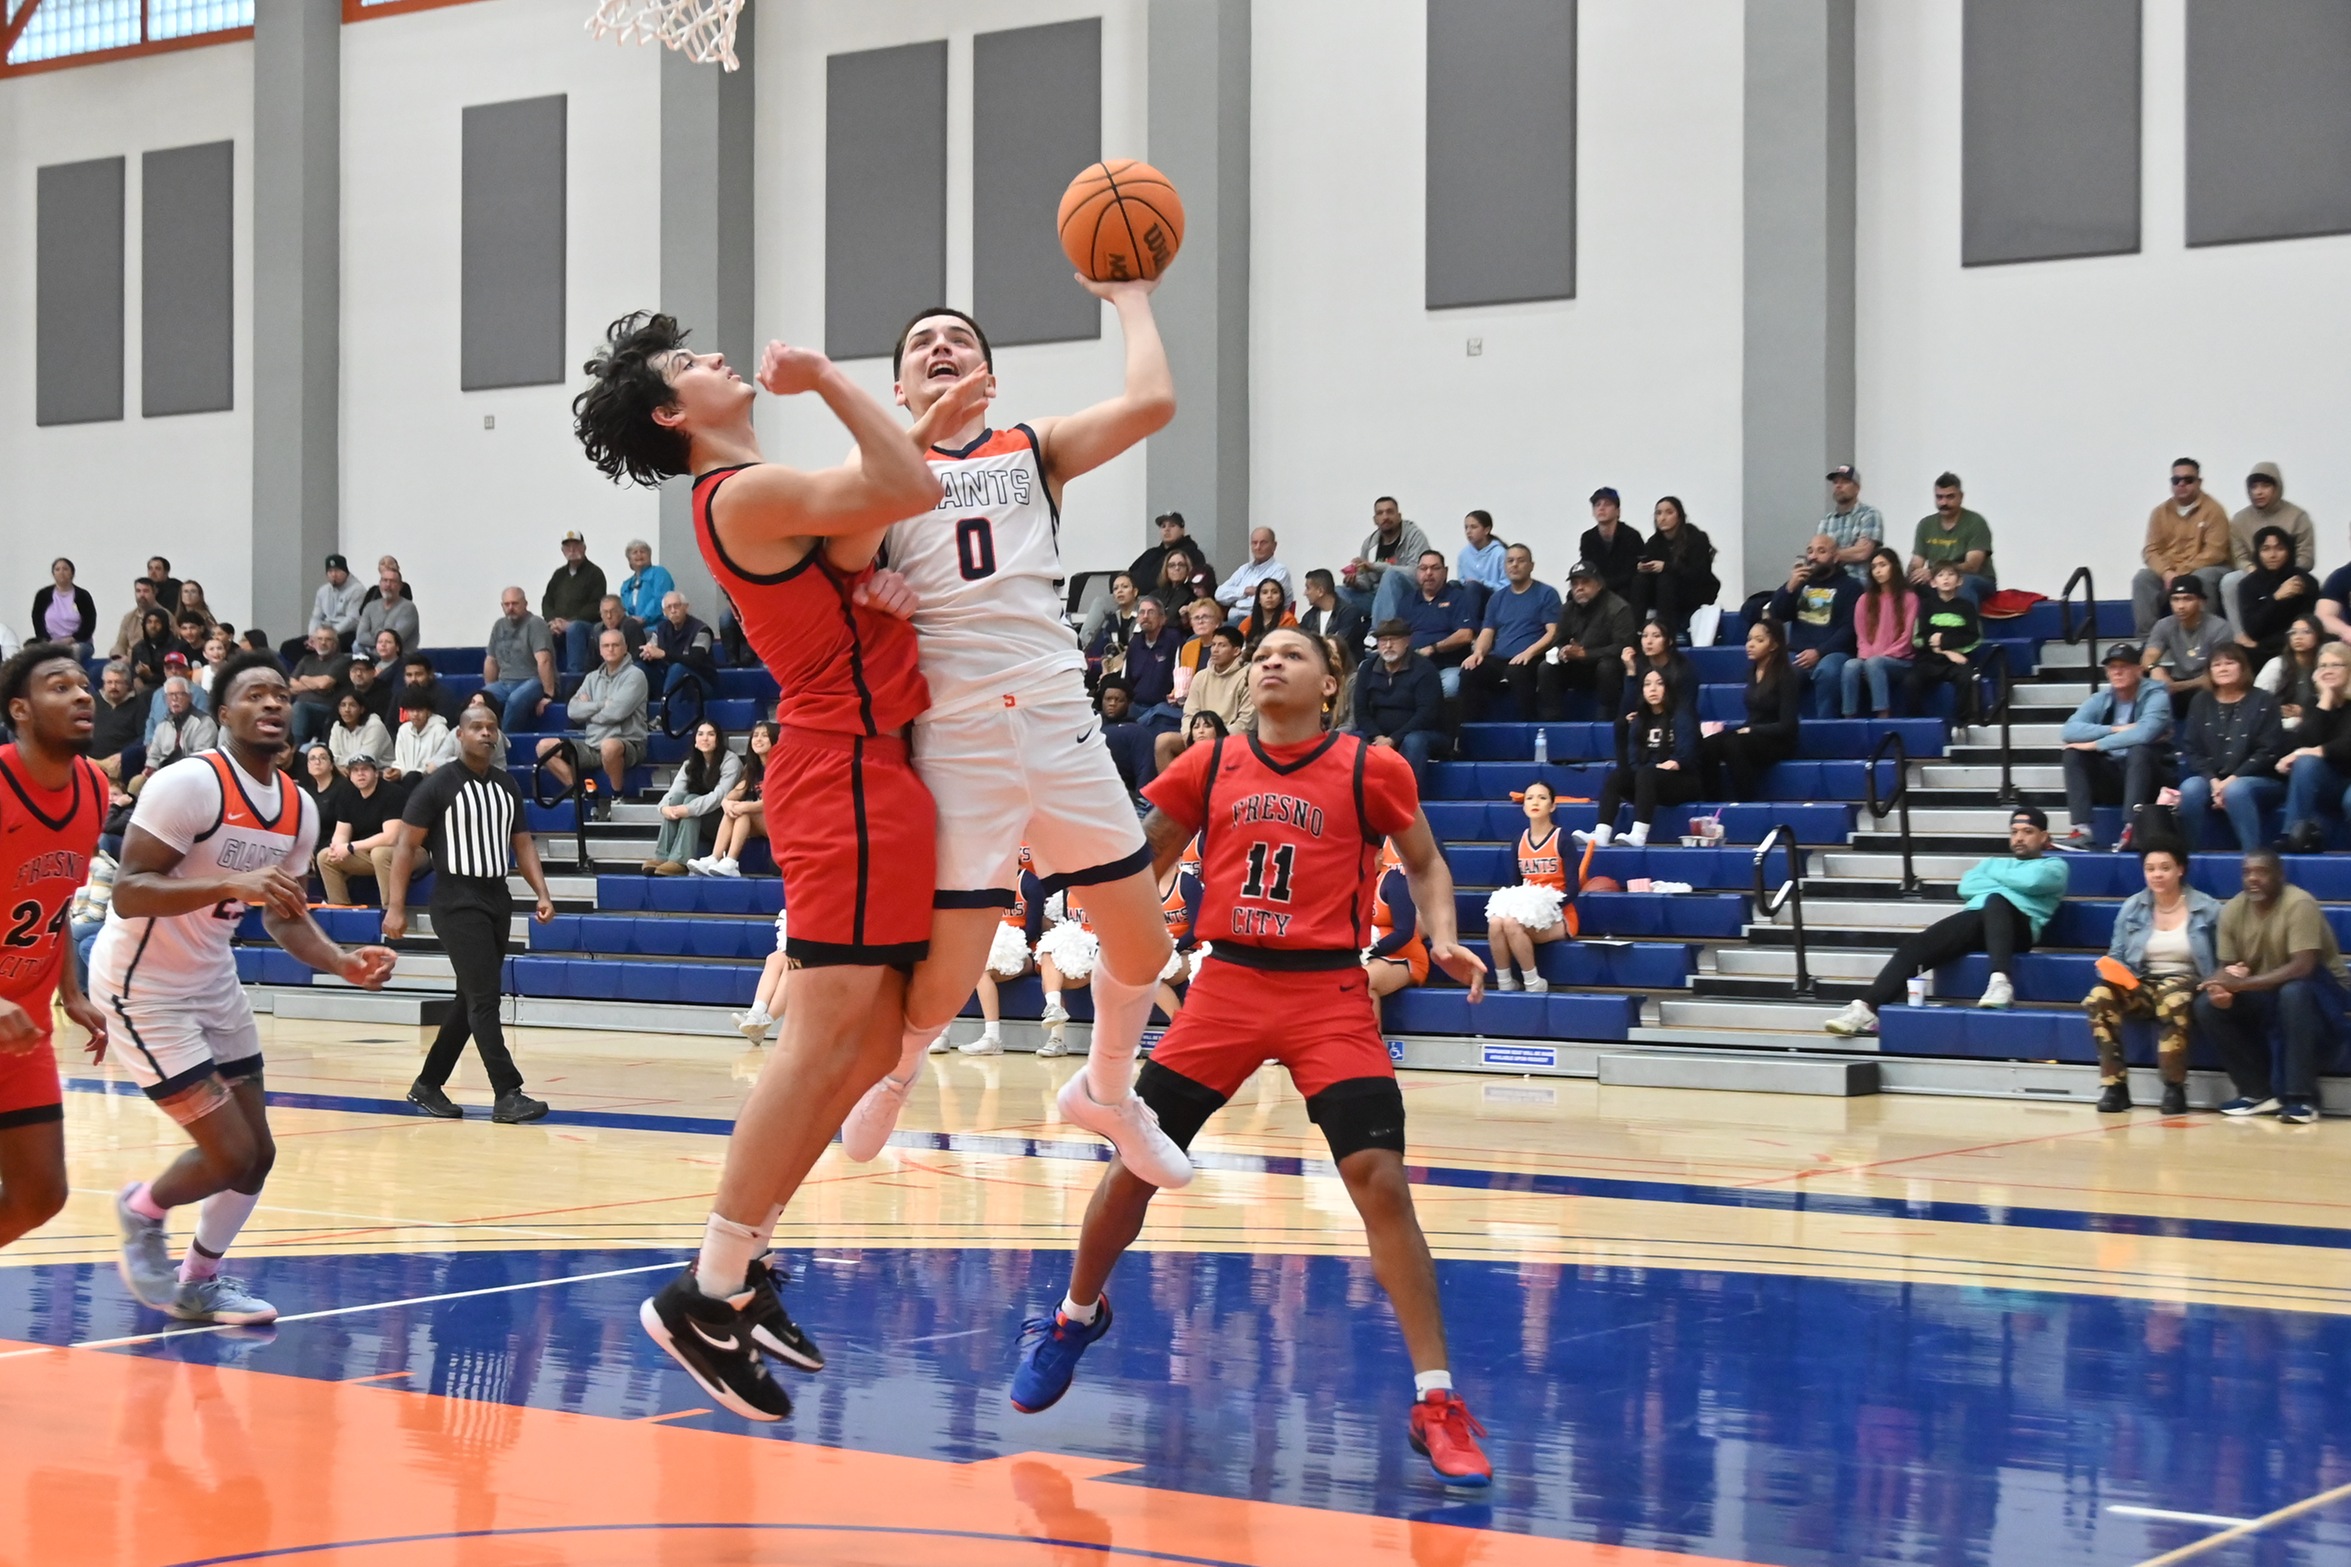 Giants fall to Reedley, sit one game behind CVC men's basketball leaders